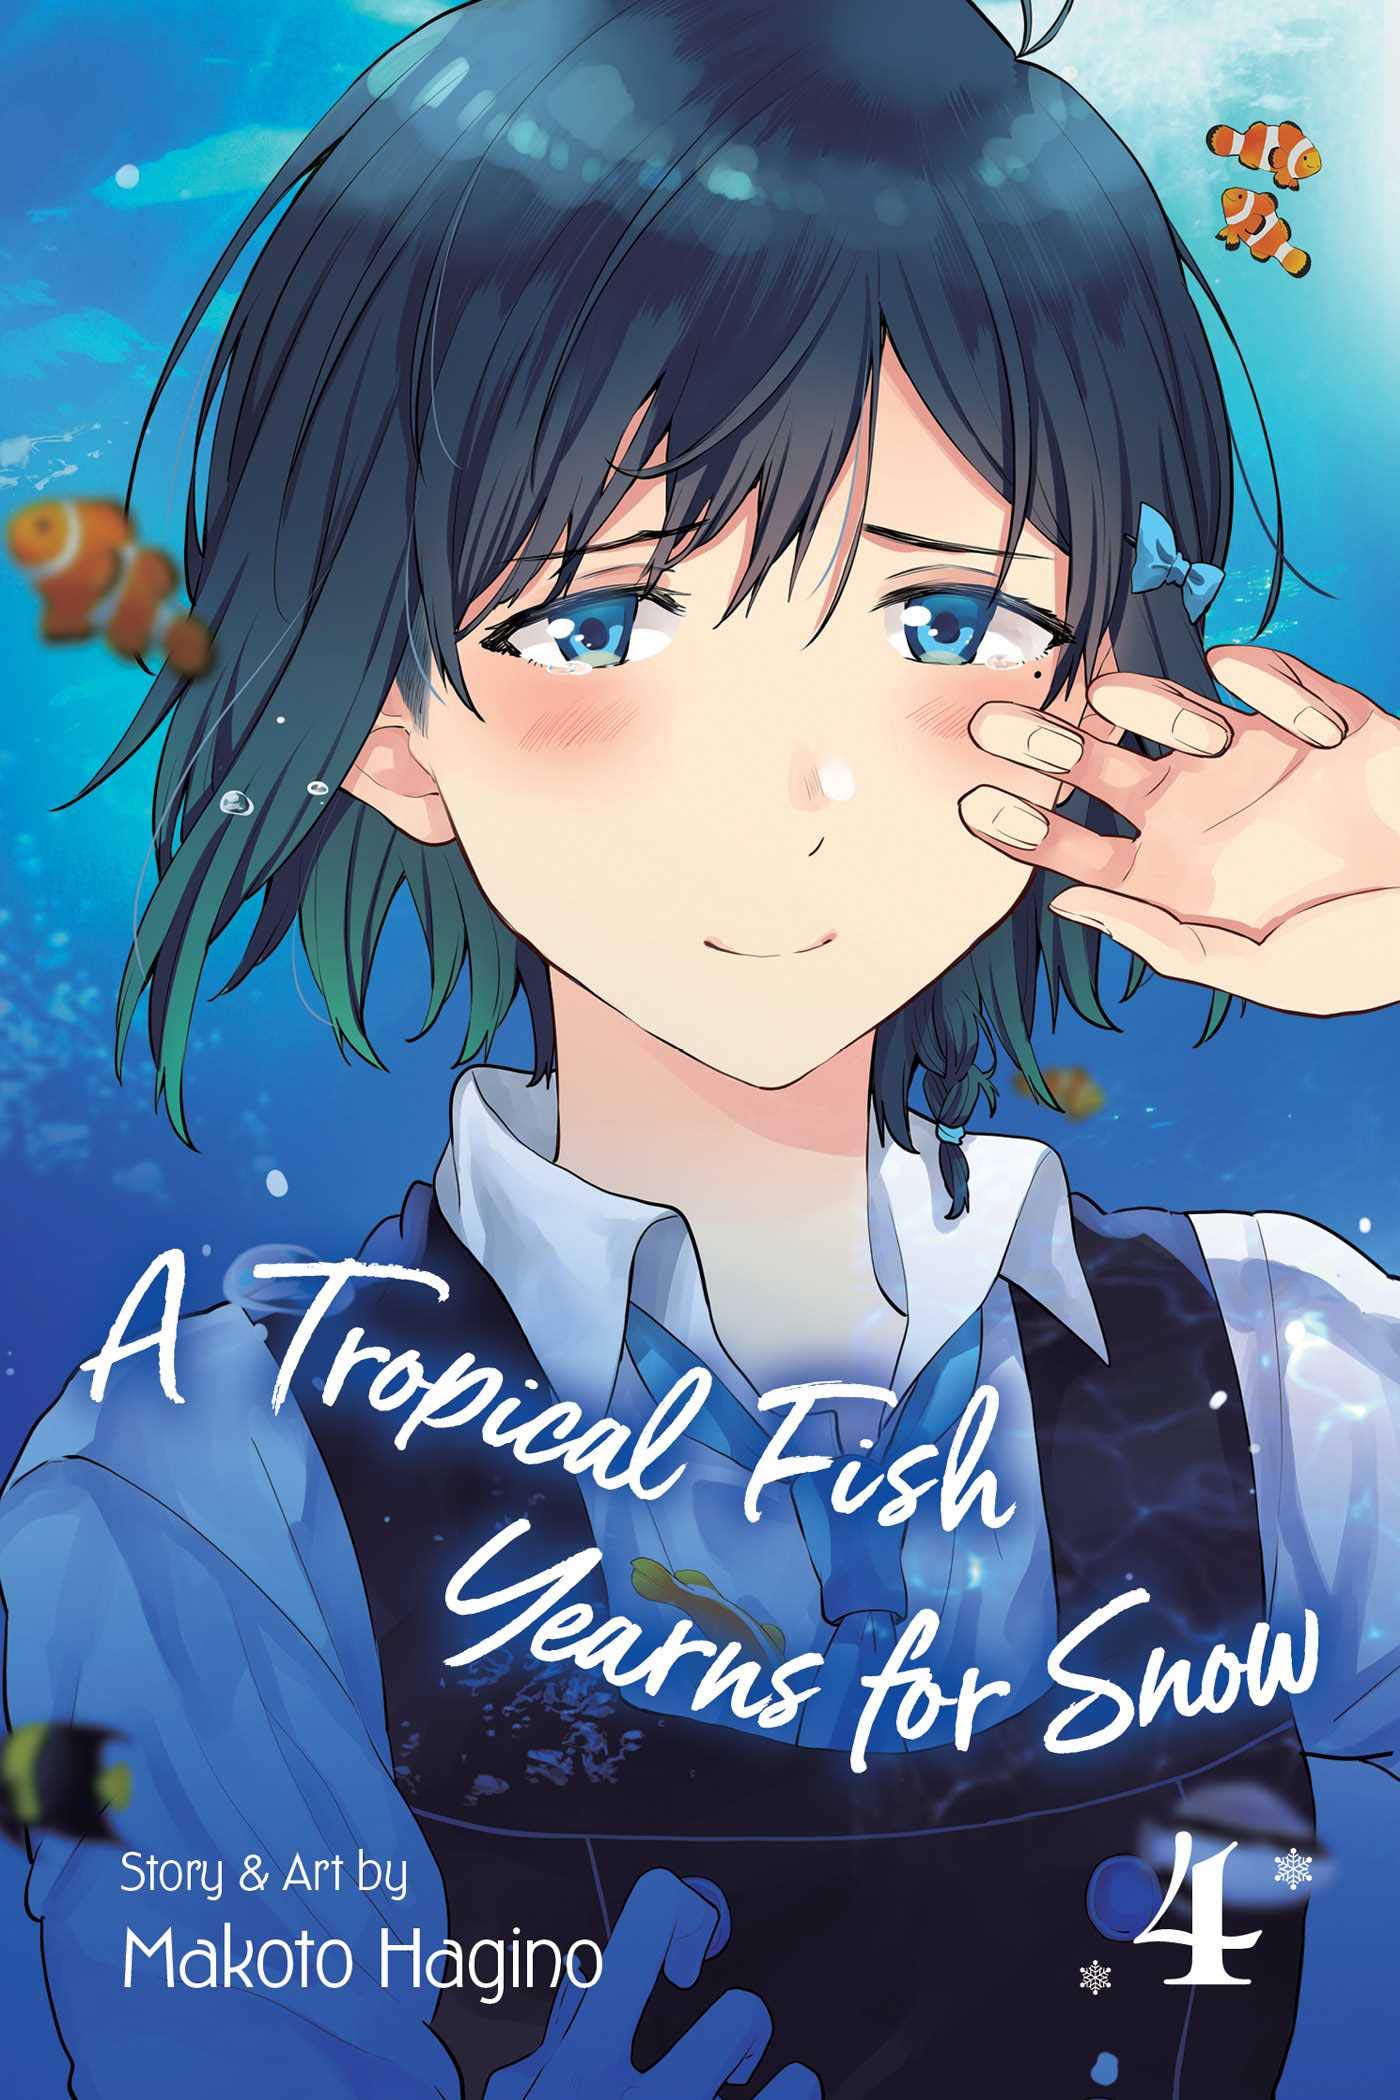 A Tropical Fish Yearns for Snow - Vol. 4